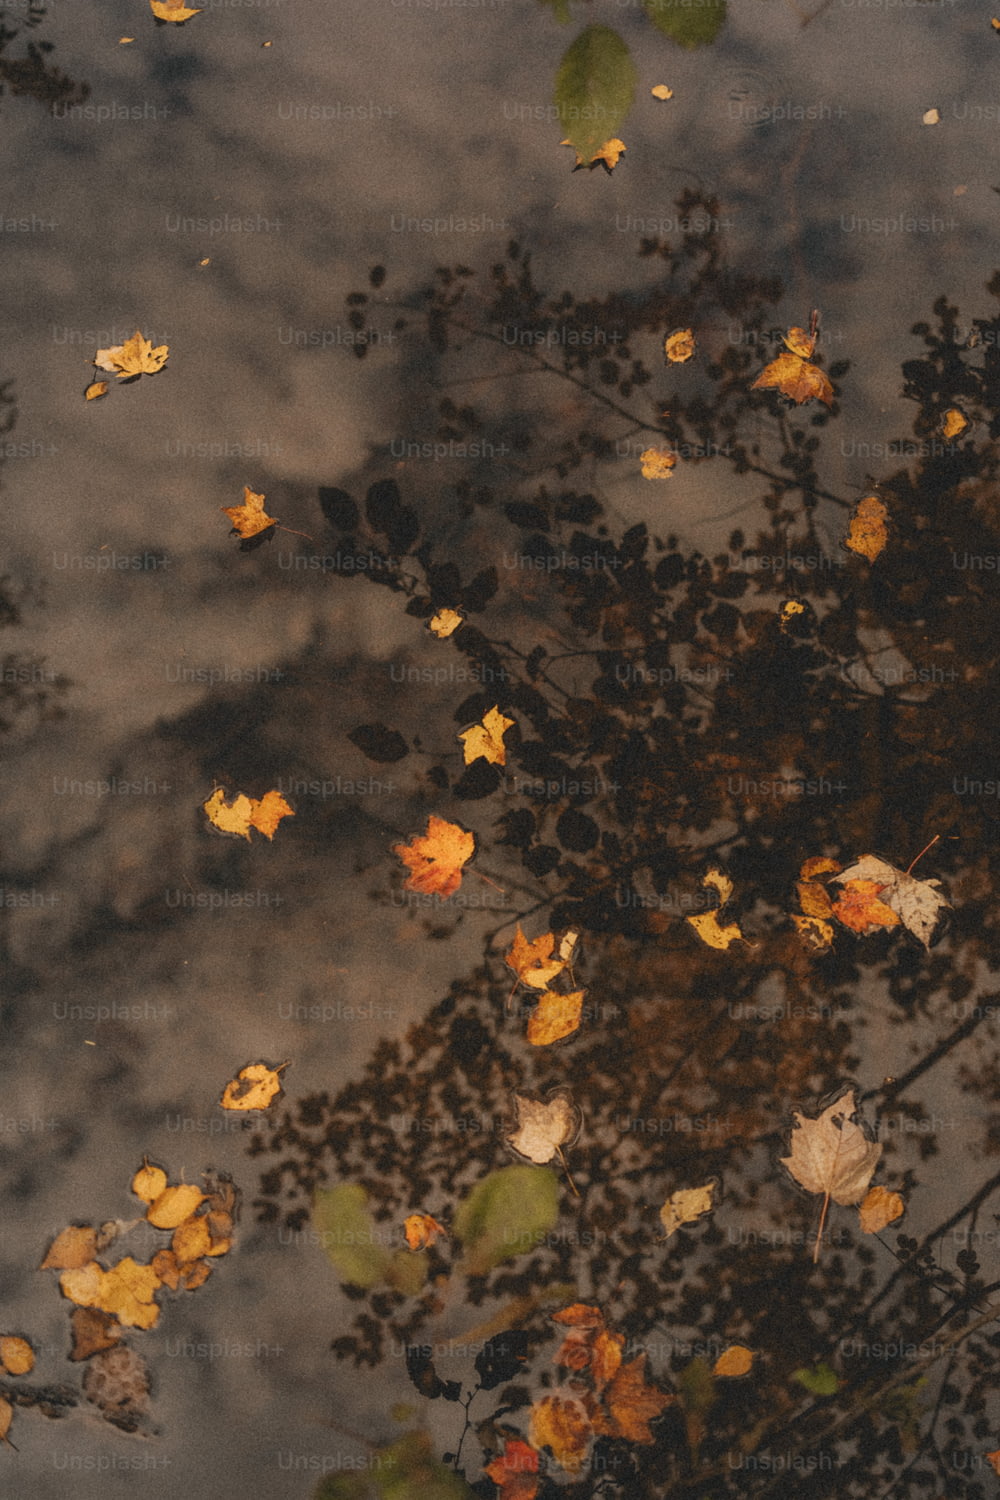 leaves floating in a puddle of water on a cloudy day